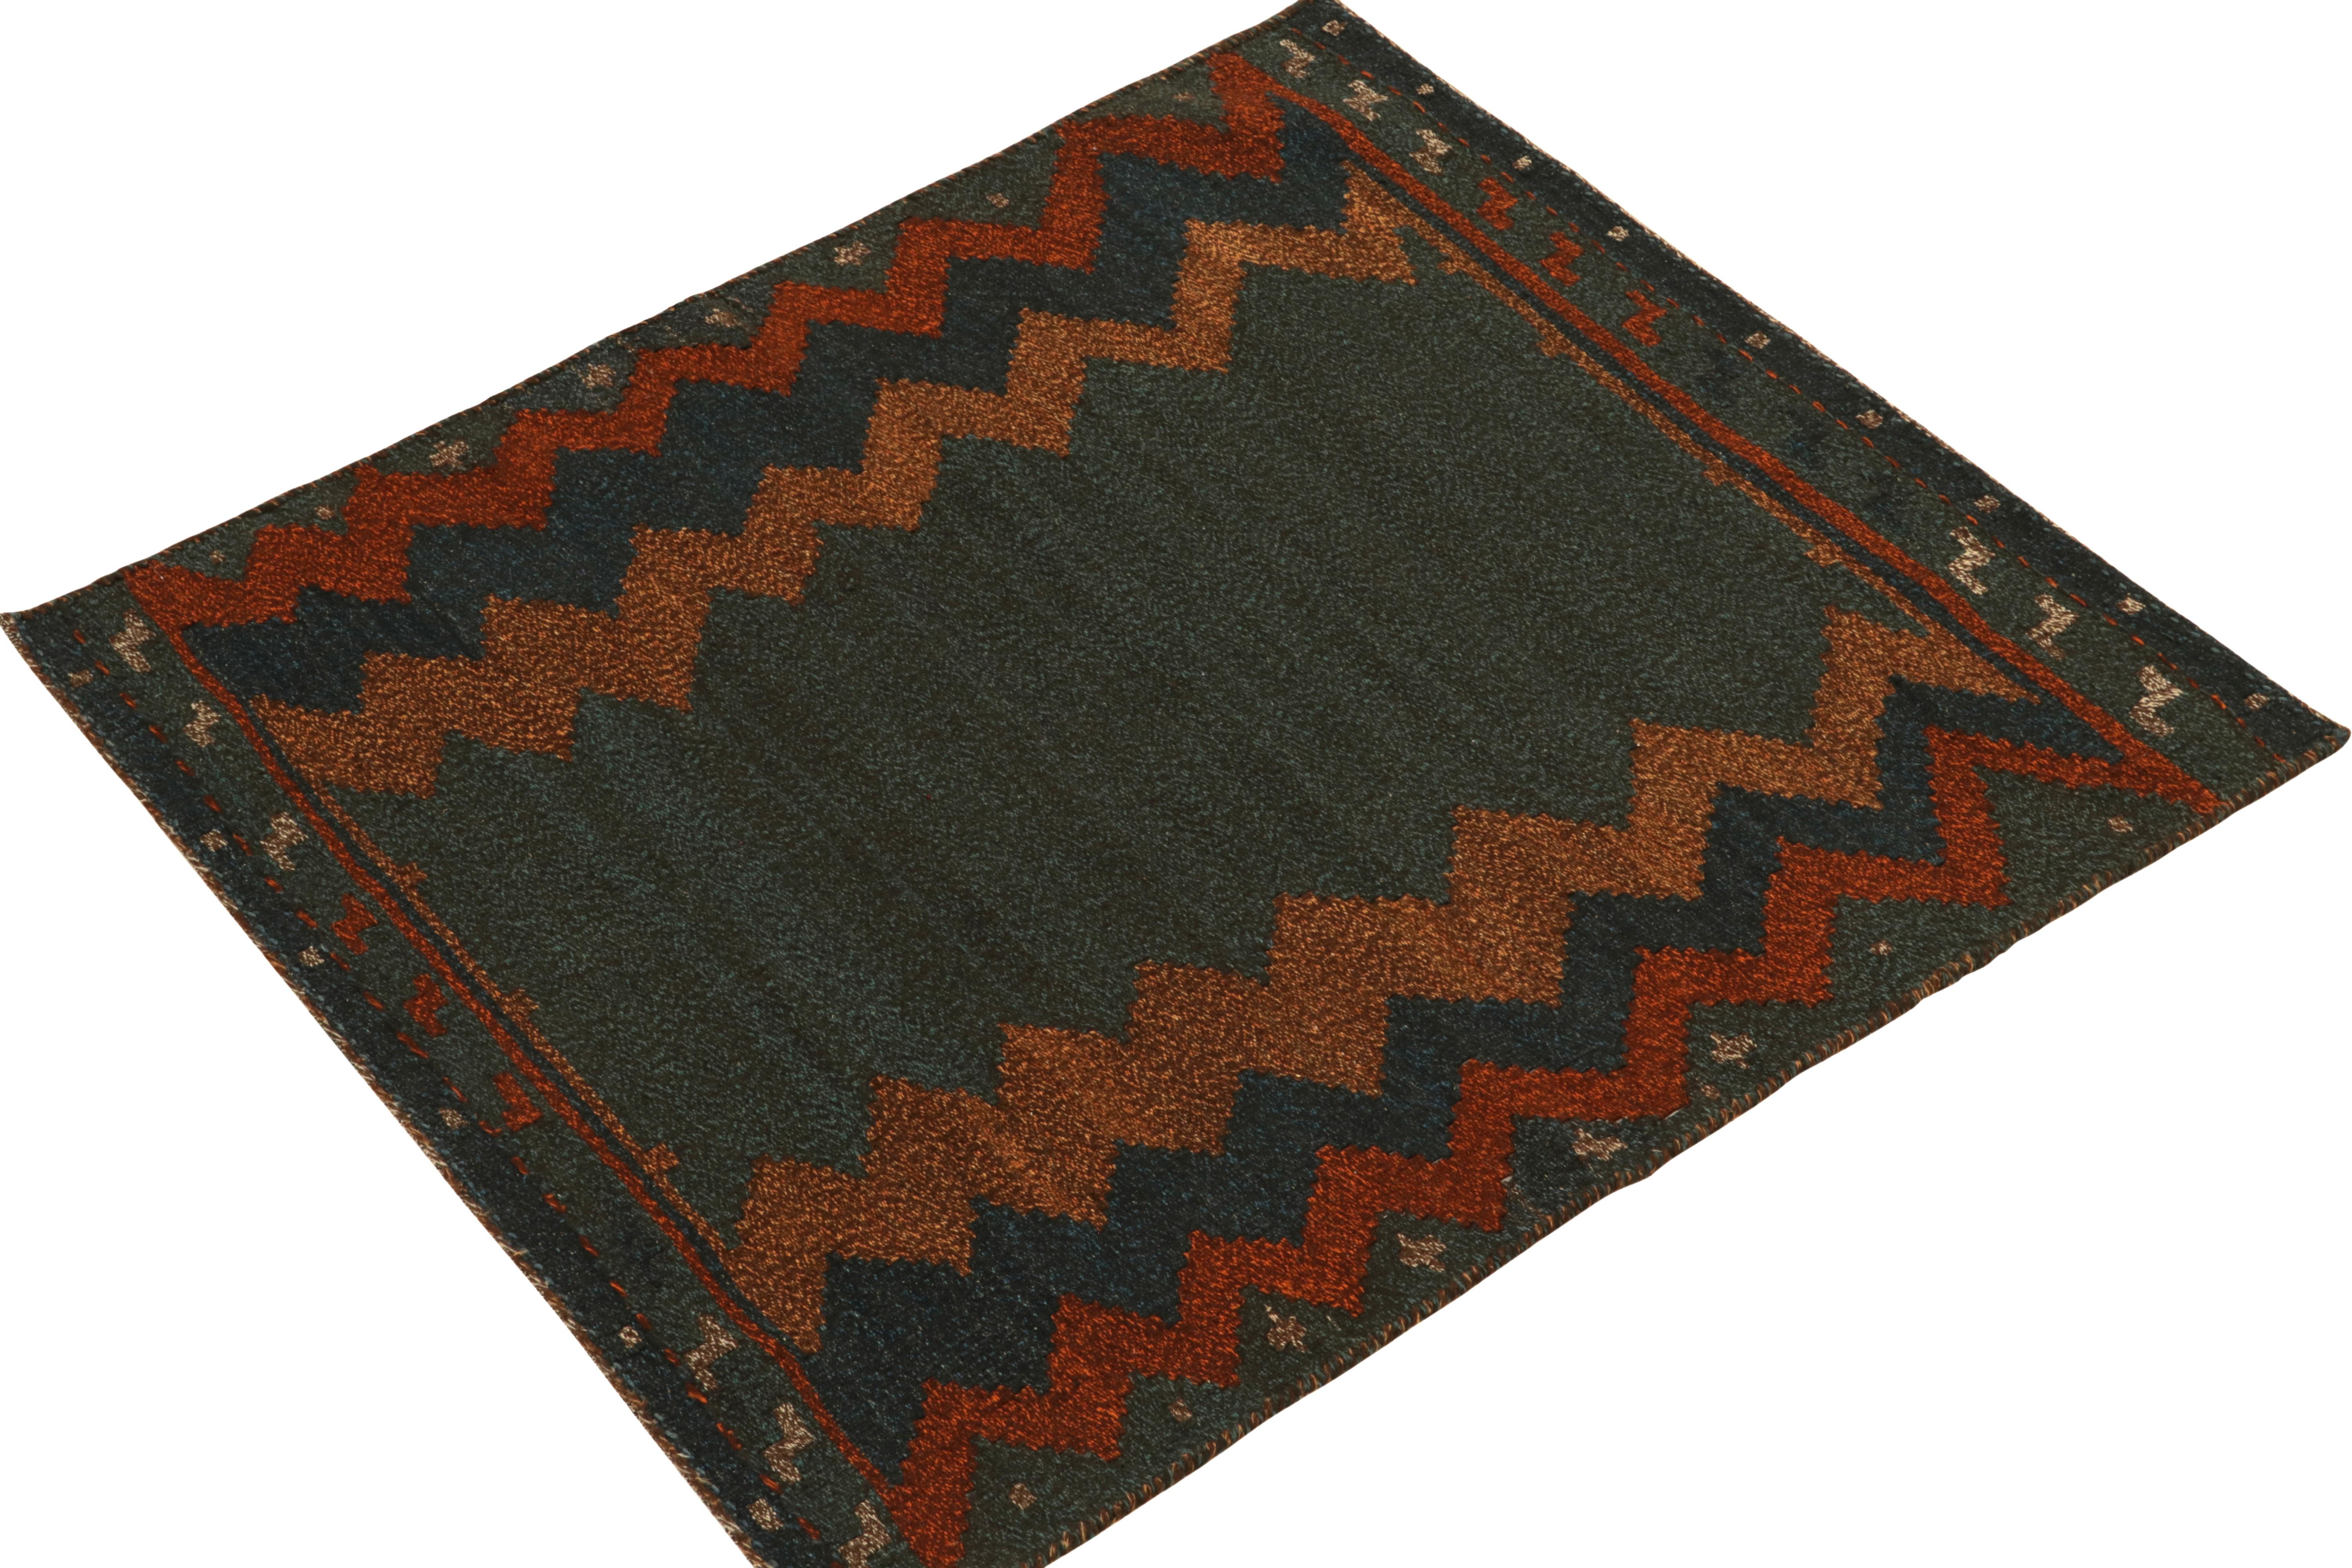 Persian 1980s Vintage Sofreh Kilim Rug in Blue & Chevron Tribal Pattern by Rug & Kilim For Sale